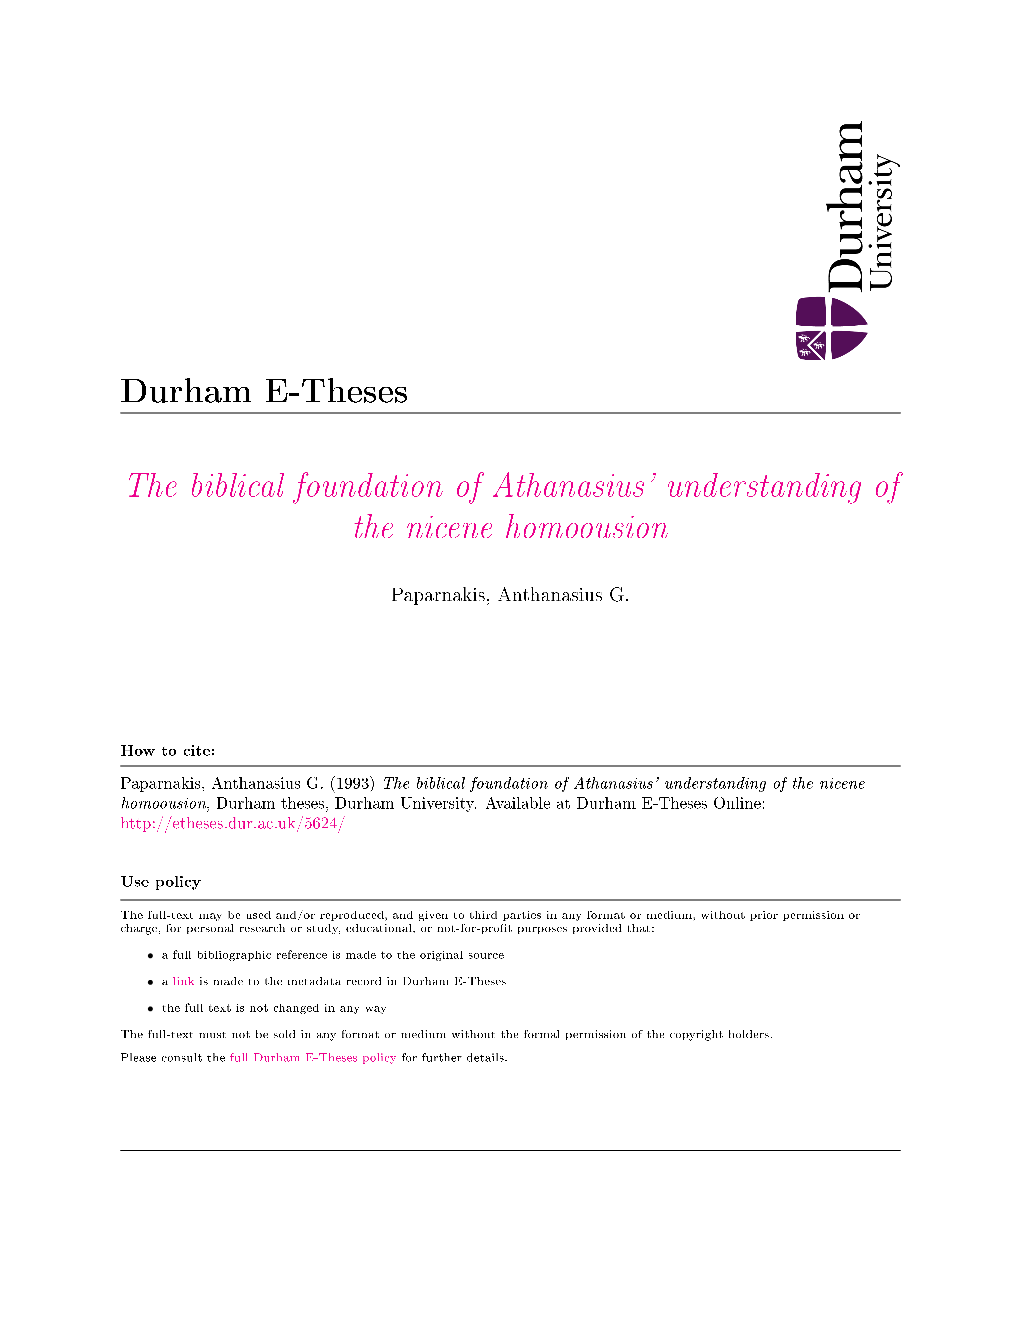 The Biblical Foundation of Athanasius' Understanding of the Nicene Homoousion